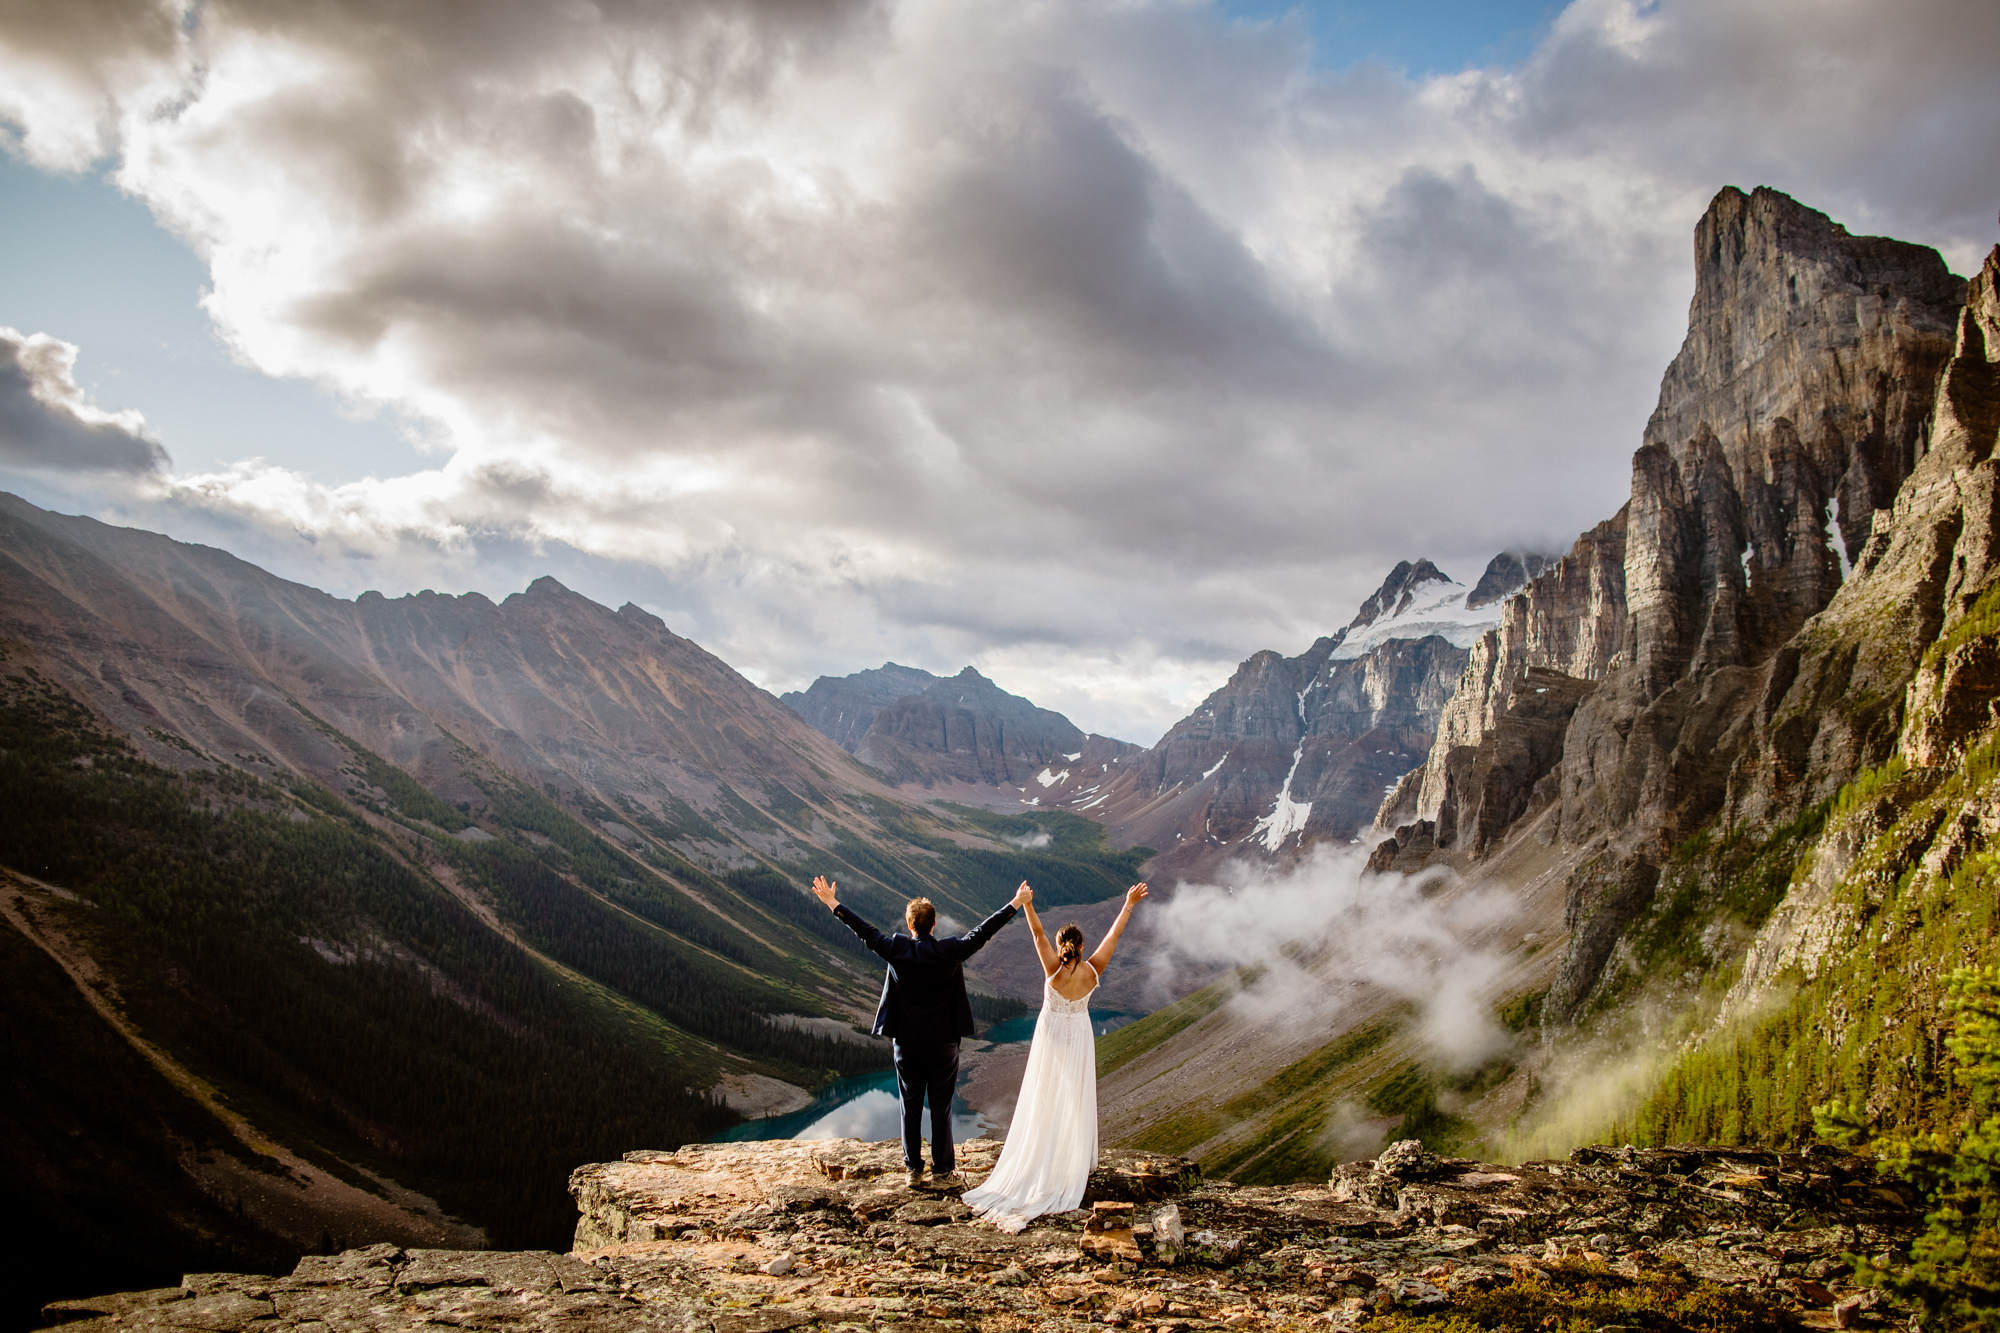 Banff wedding photographers and adventure elopements in Canada